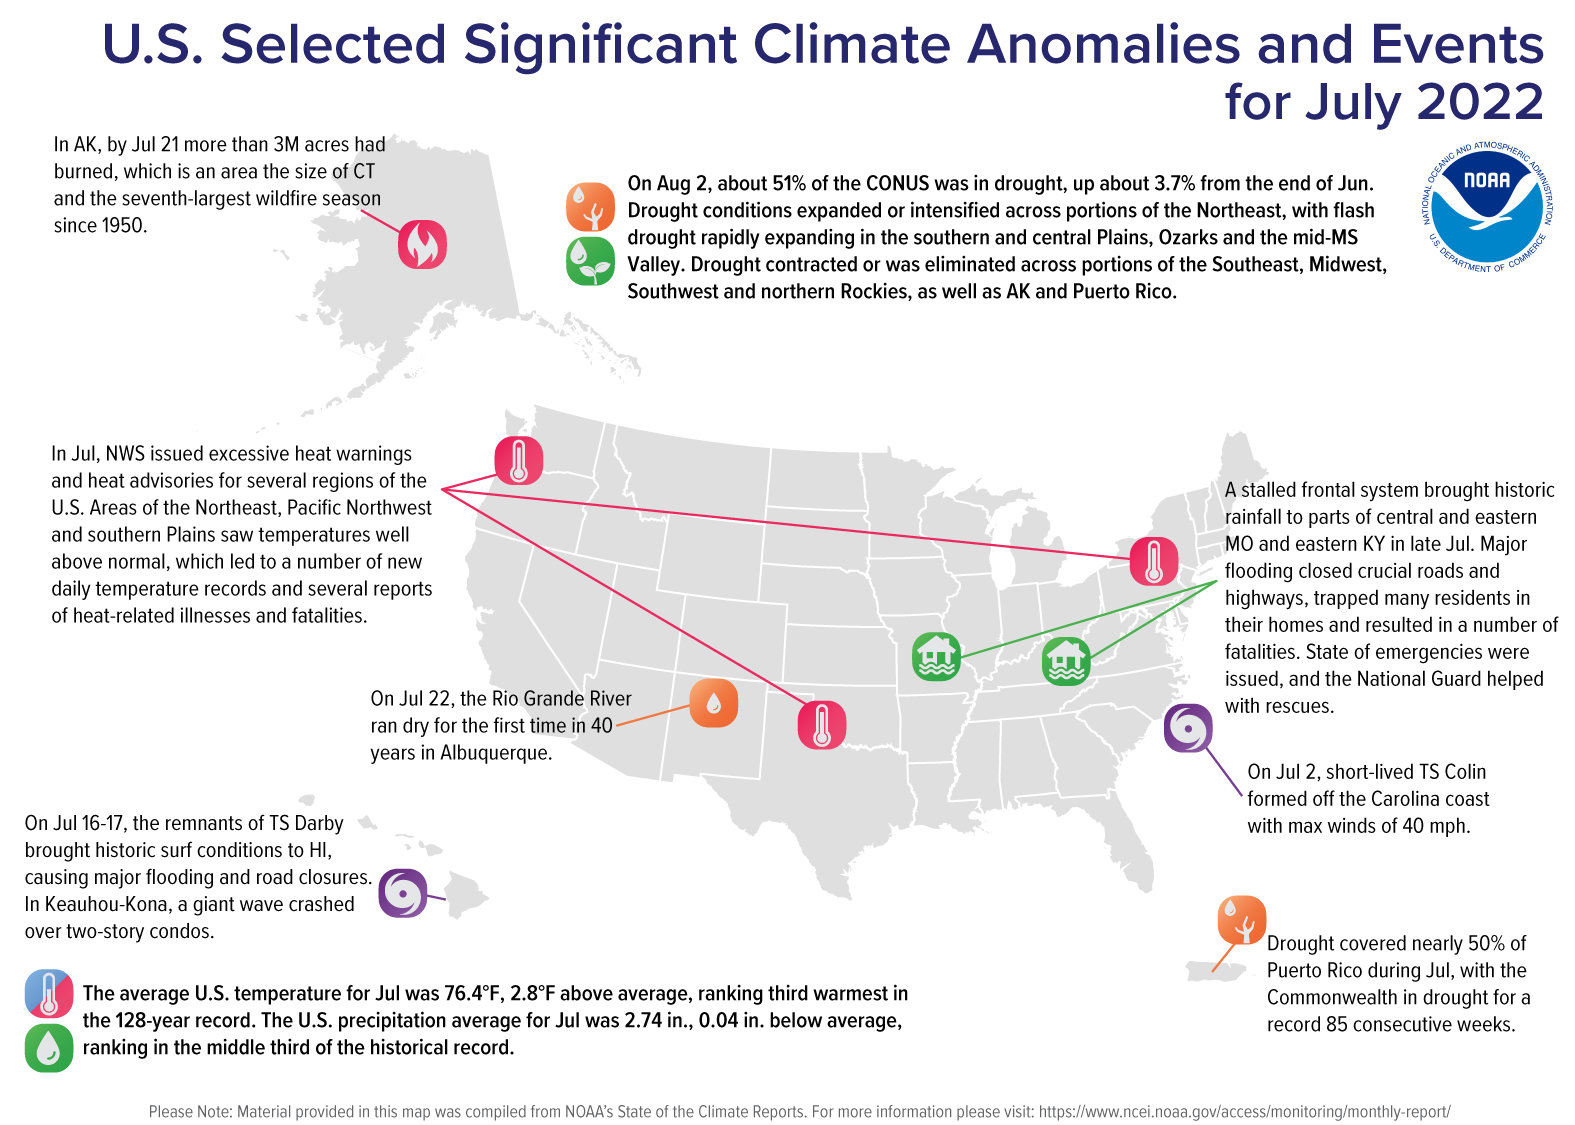 A map of the United States plotted with significant climate events that occurred during July 2022. Please see the story below as well as the full climate report highlights at http://bit.ly/USClimate202207.